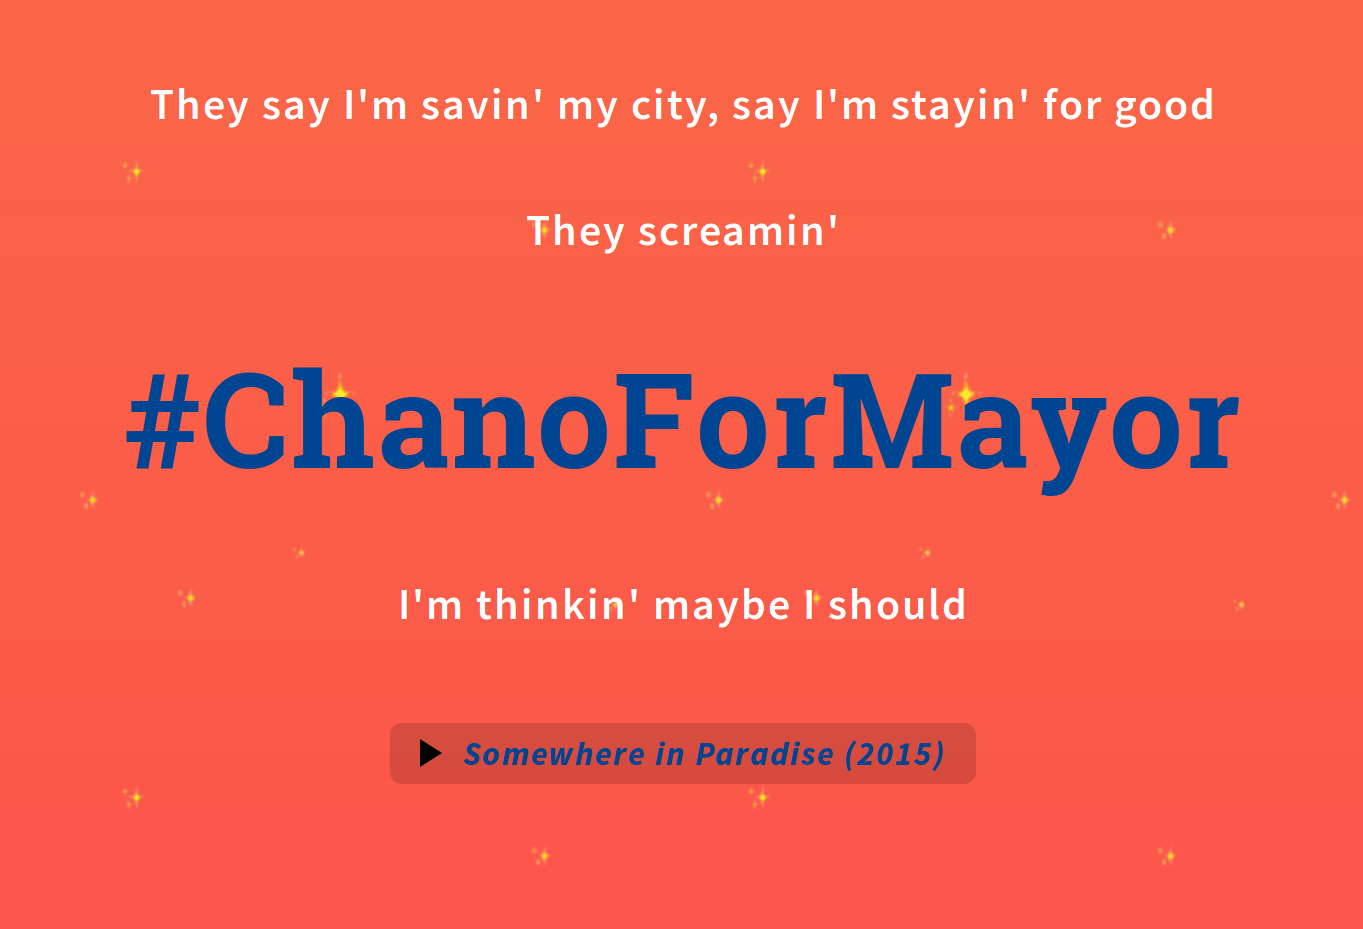 An excerpt from chano4mayor.com. Text is excerpted from Chance's song
"Somewhere in Paradise". It reads: "They say I'm savin' my city,
say I'm stayin' for good, they screamin' #chano4mayor, I'm thinkin' maybe I 
should"